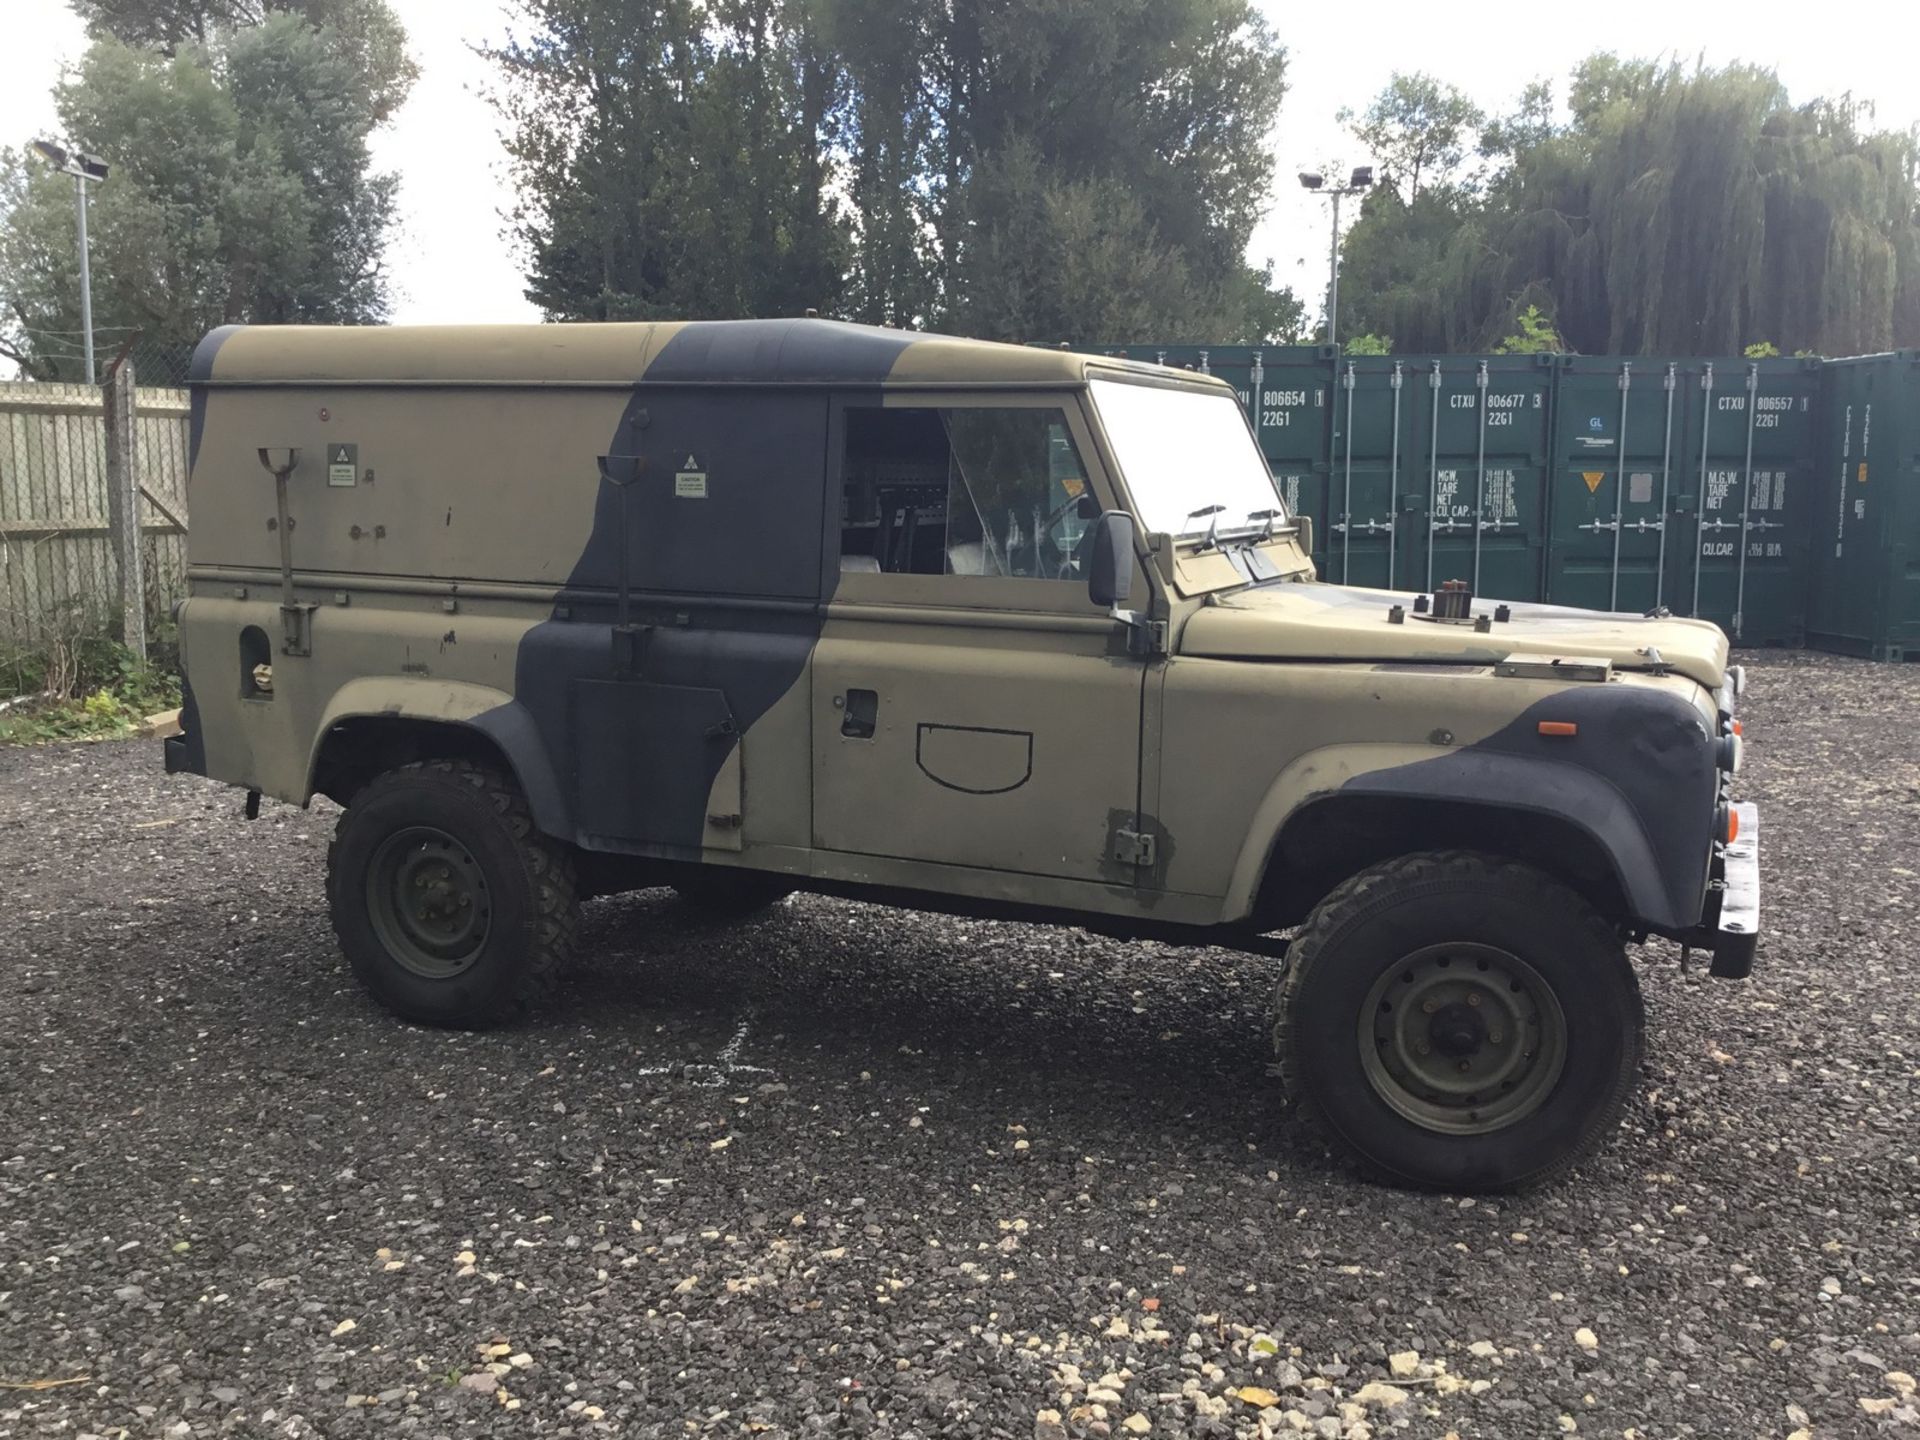 1990 Land Rover 110 Reg. no. Unregistered Chassis no. SALLDHAC7FA407380 Engine no. Unknown This - Image 6 of 6